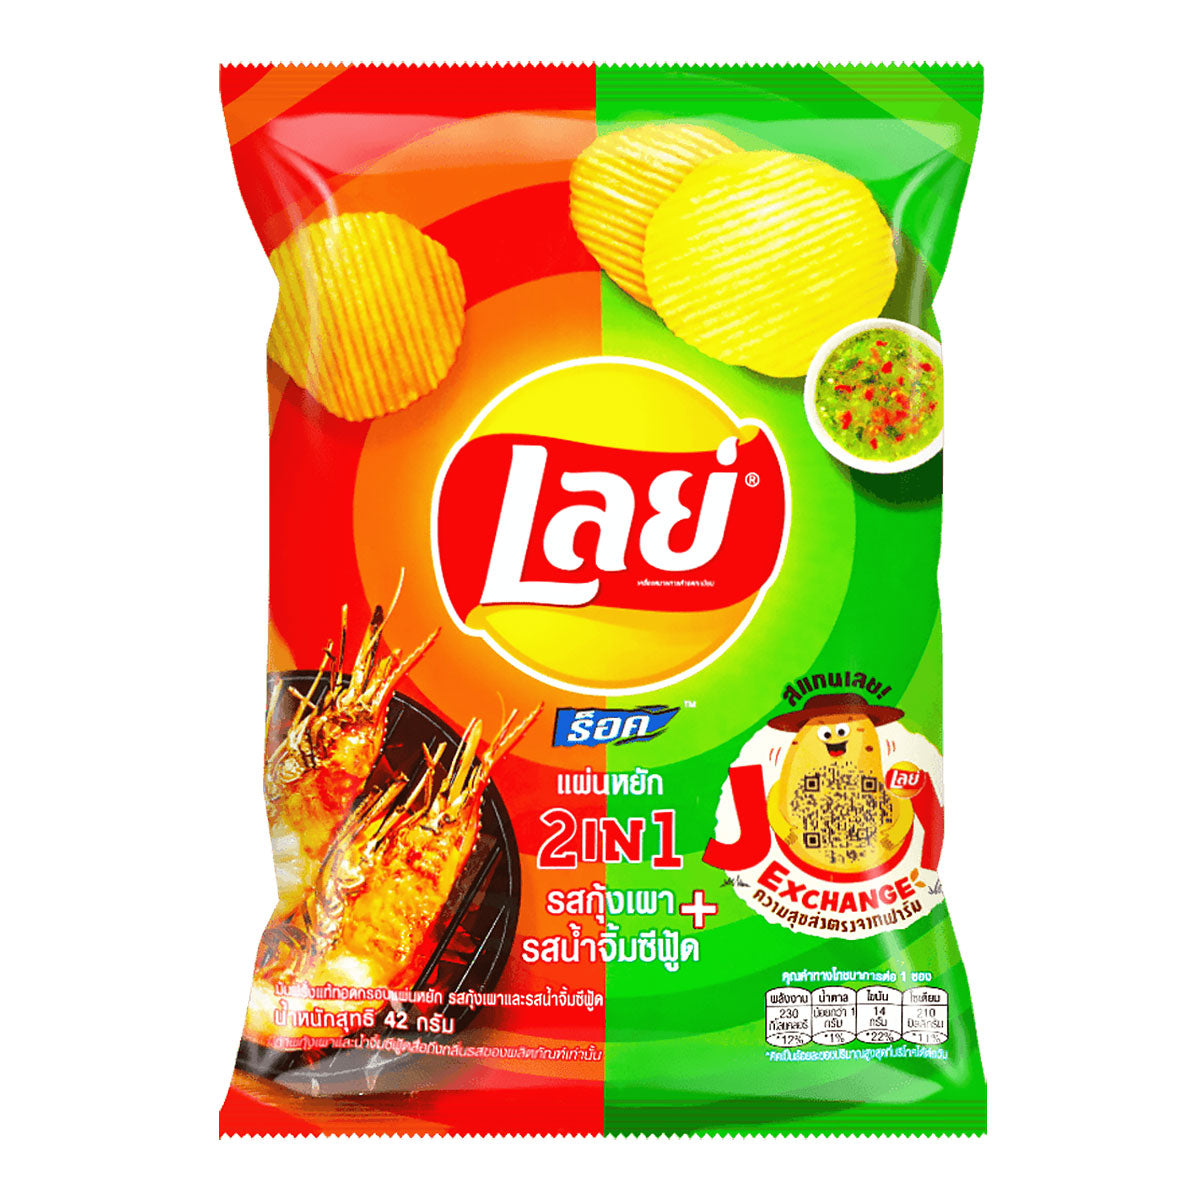 lay's potato chips 2 in 1 seafood sauce flavor - 1.69oz